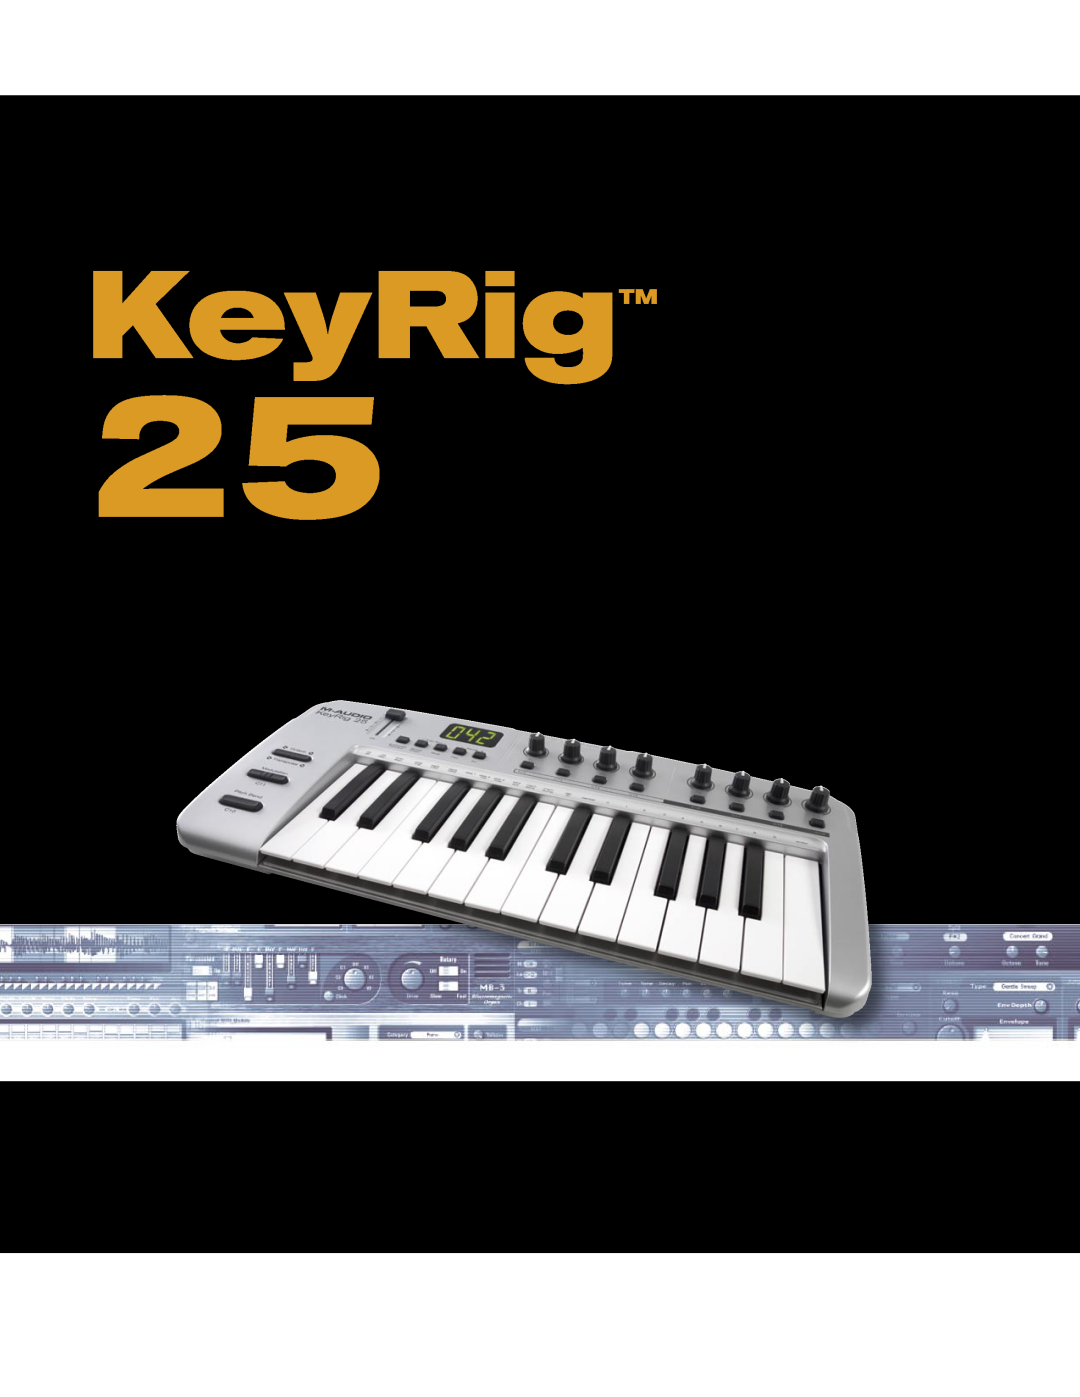 M-Audio manual KeyRigTM, User Guide, Easy-to-Use 25-NoteUSB Keyboard 